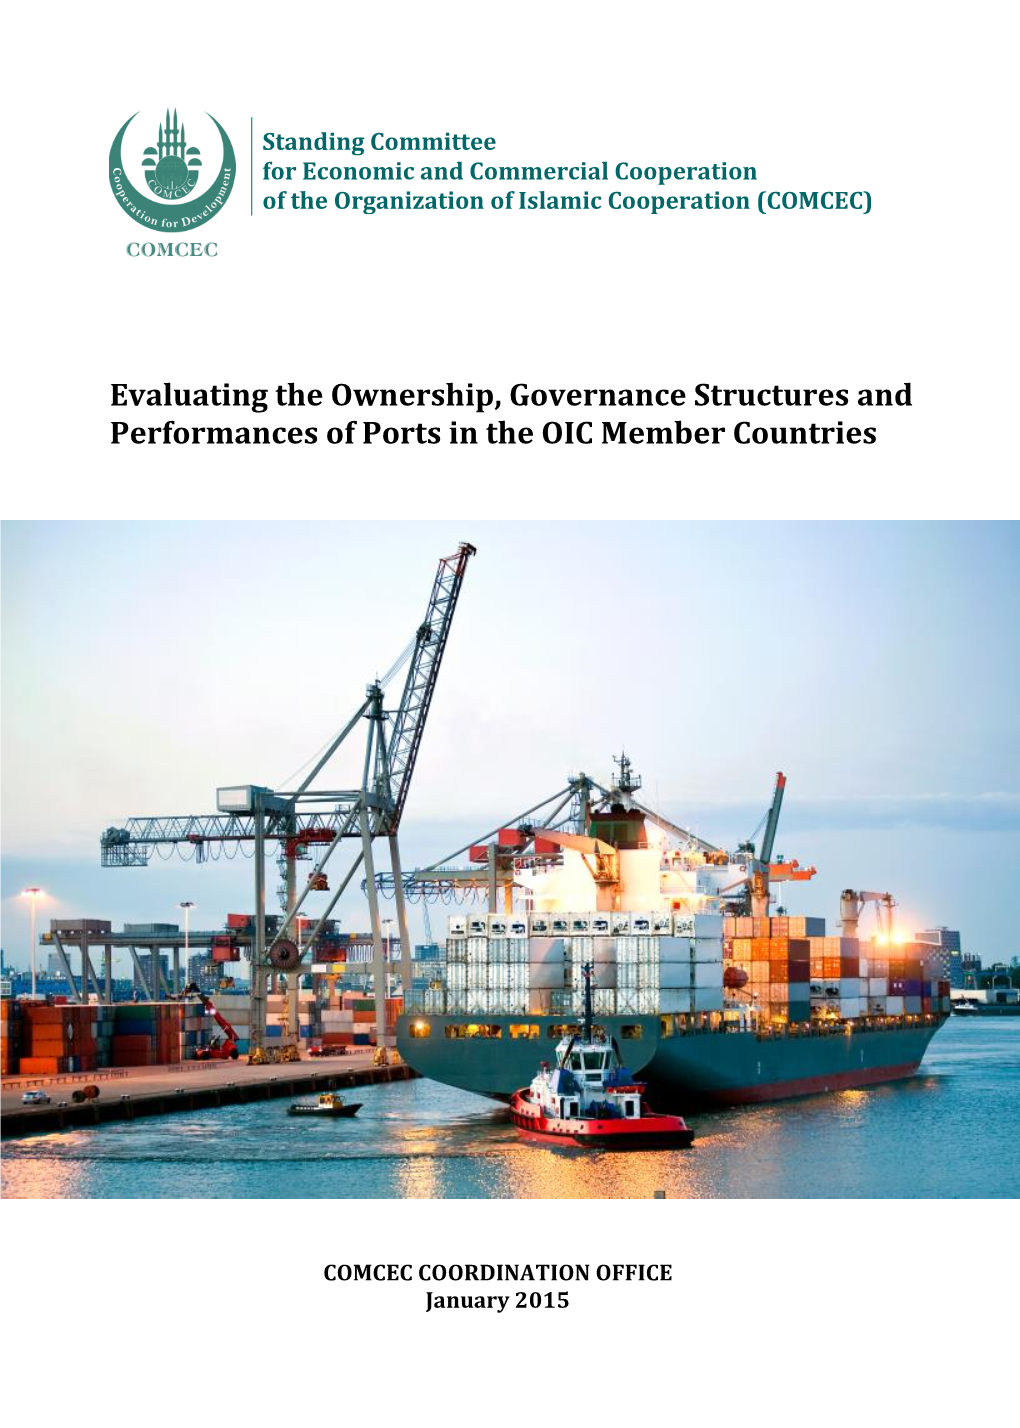 Evaluating the Ownership, Governance Structures, And